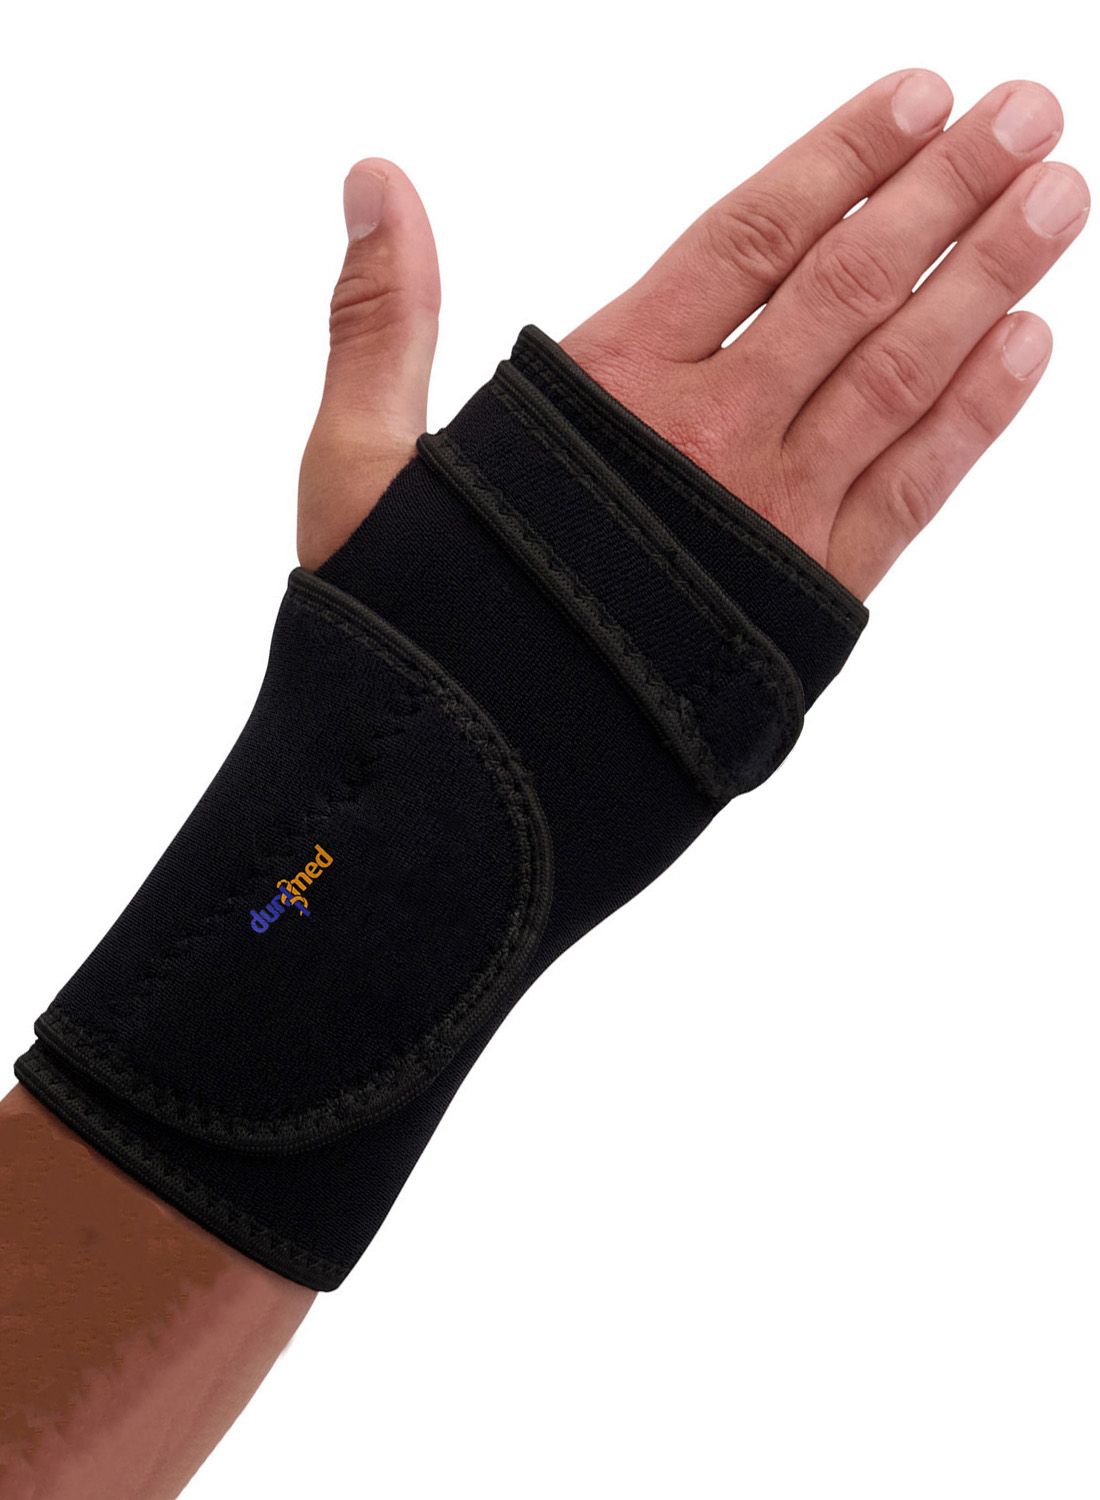 dunimed carpal tunnel syndrome wrist support for sale